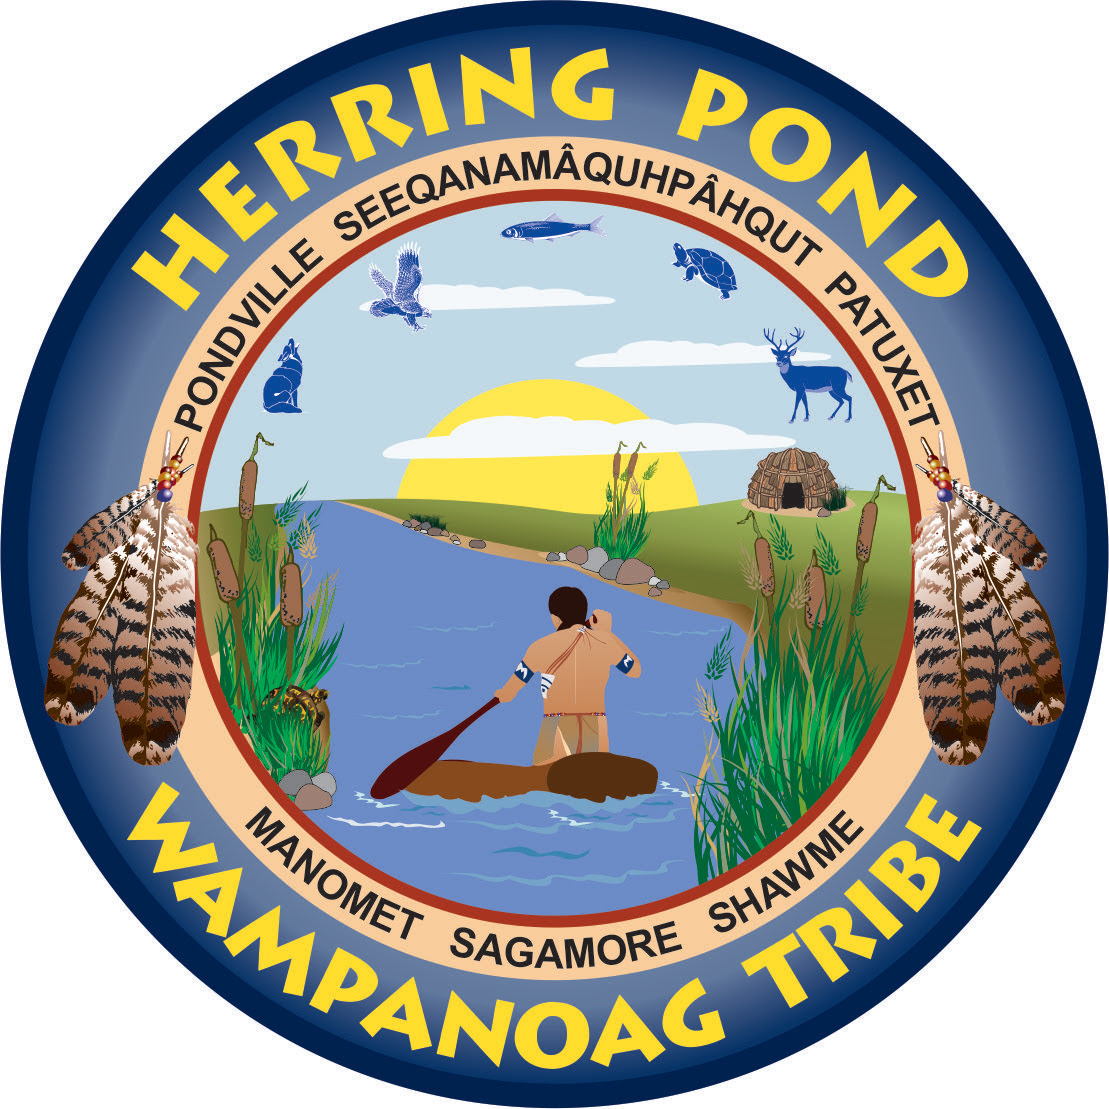 Herring Pond Wampanoags Solicit Donations to Help Acquire Some of Their Ancestral Land